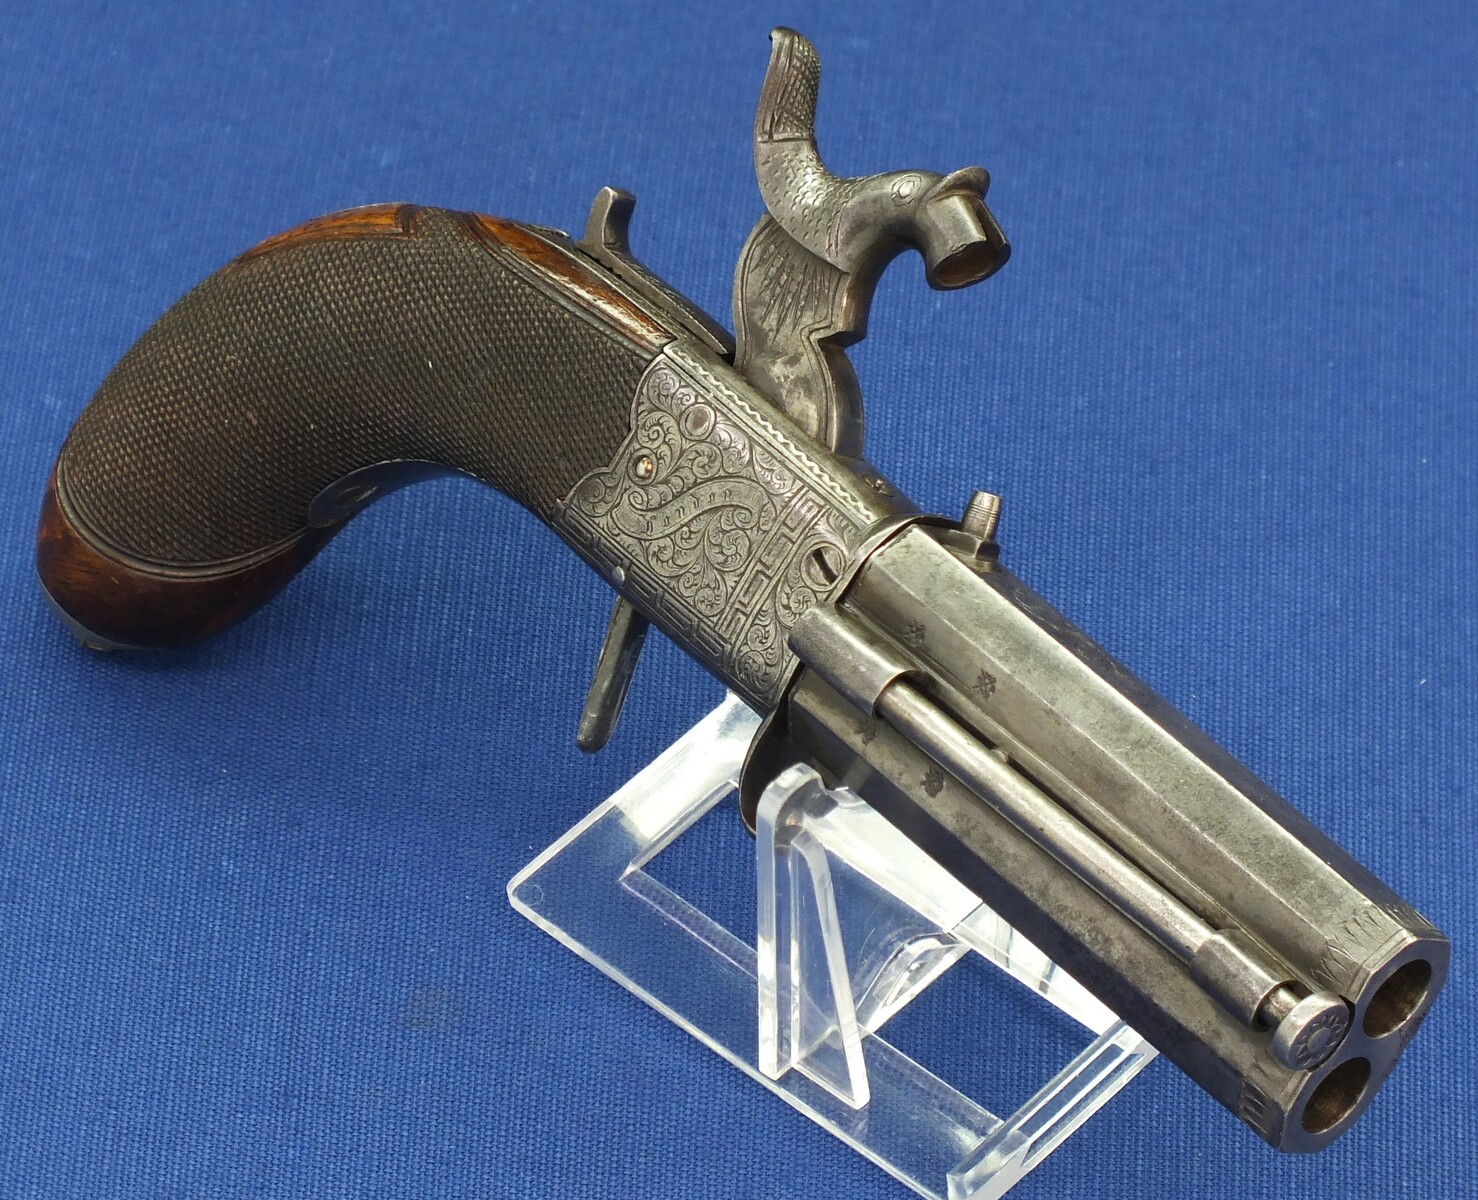 An English Percussion Wender pistol with thumbpiece safety catch by D.Mortimer London. Caliber 9,5mm. Length 19cm. In very good condition. Price 950 euro